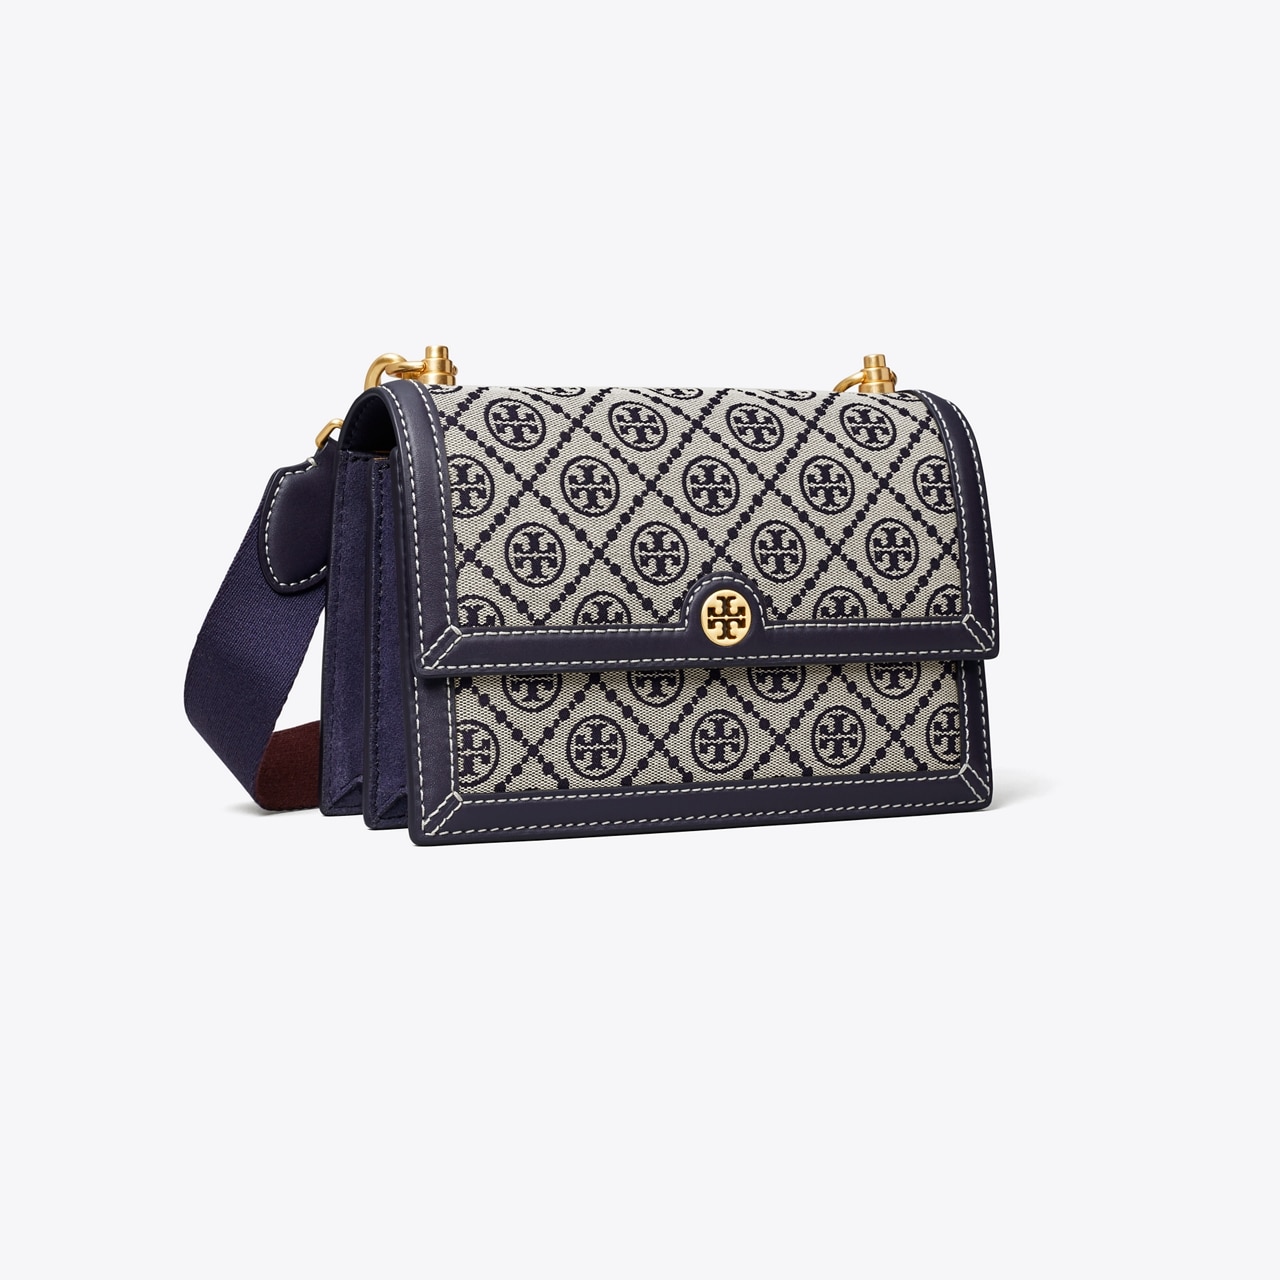 Tory Burch Navy T Monogram Jacquard Shoulder Bag, Best Price and Reviews